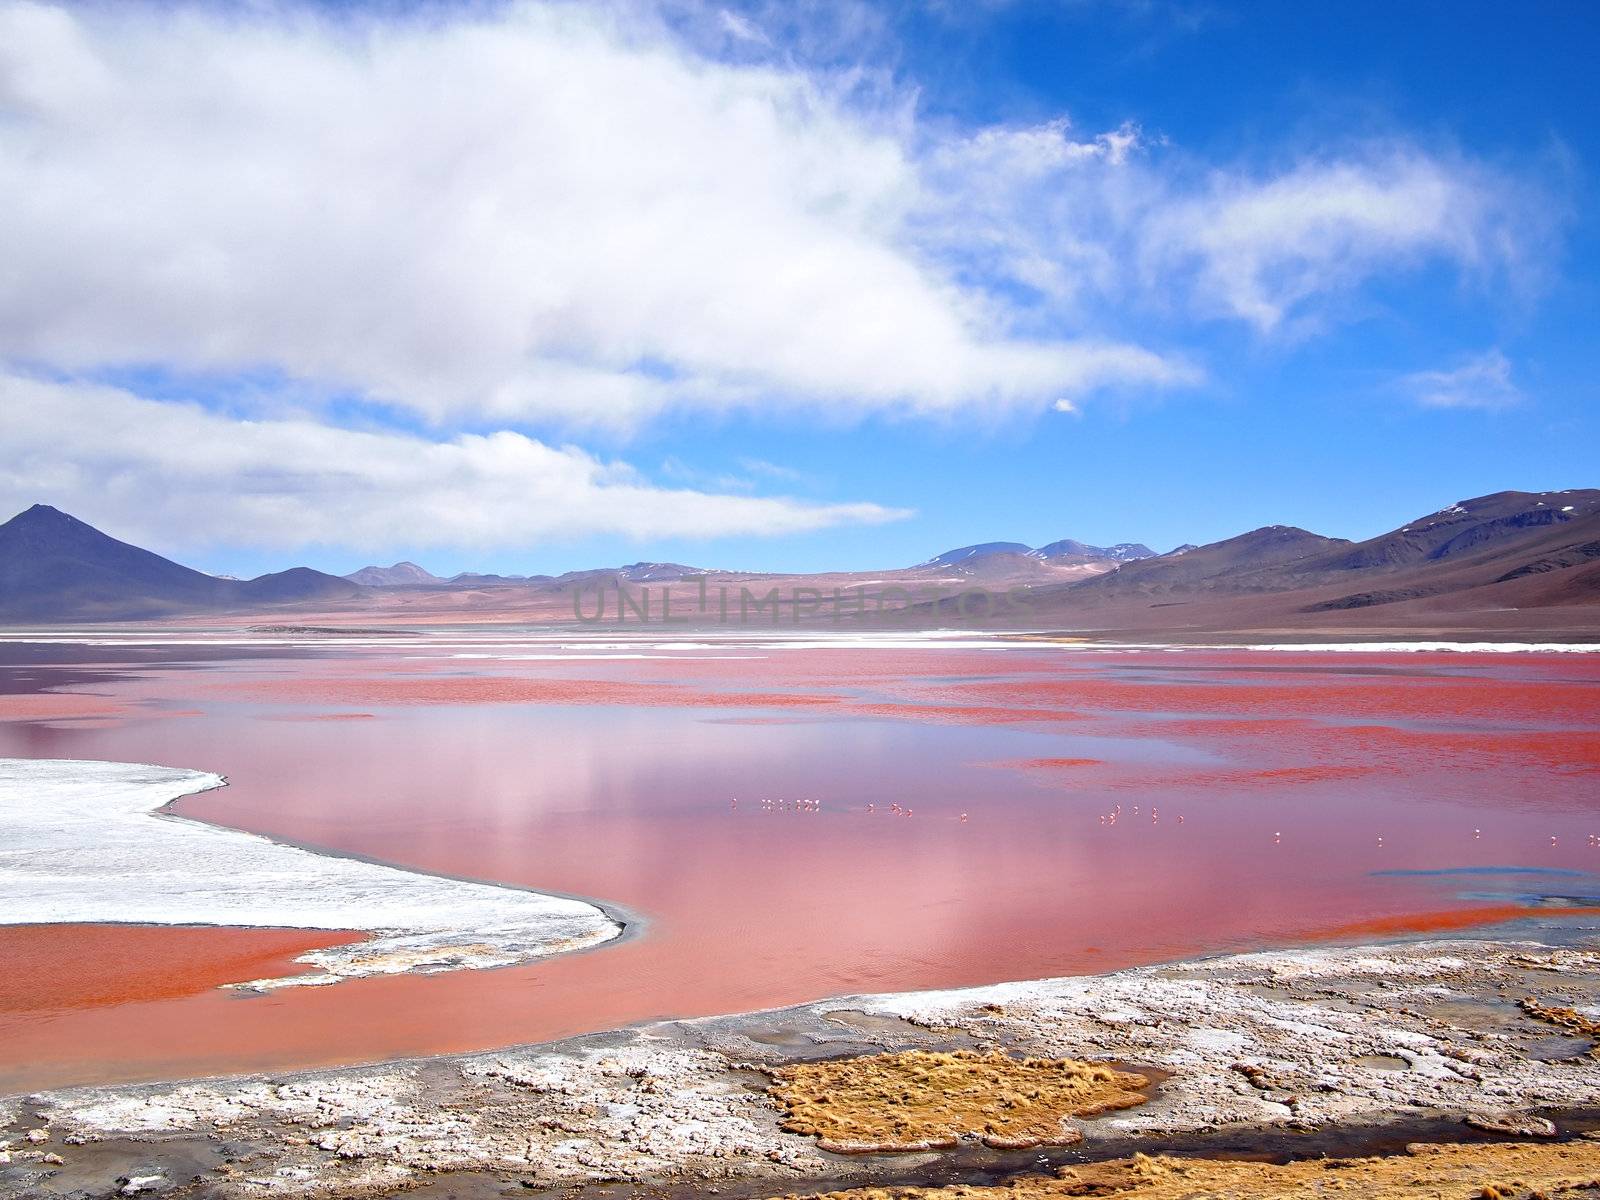 The Red Lagoon, or Laguna Colorada, on the Altiplano near Uyuni inside Eduardo Avaroa National Reserve in Bolivia at 4300 m above sea level.  The red color of the water is caused by sediments and algae. The white part is borax salt.